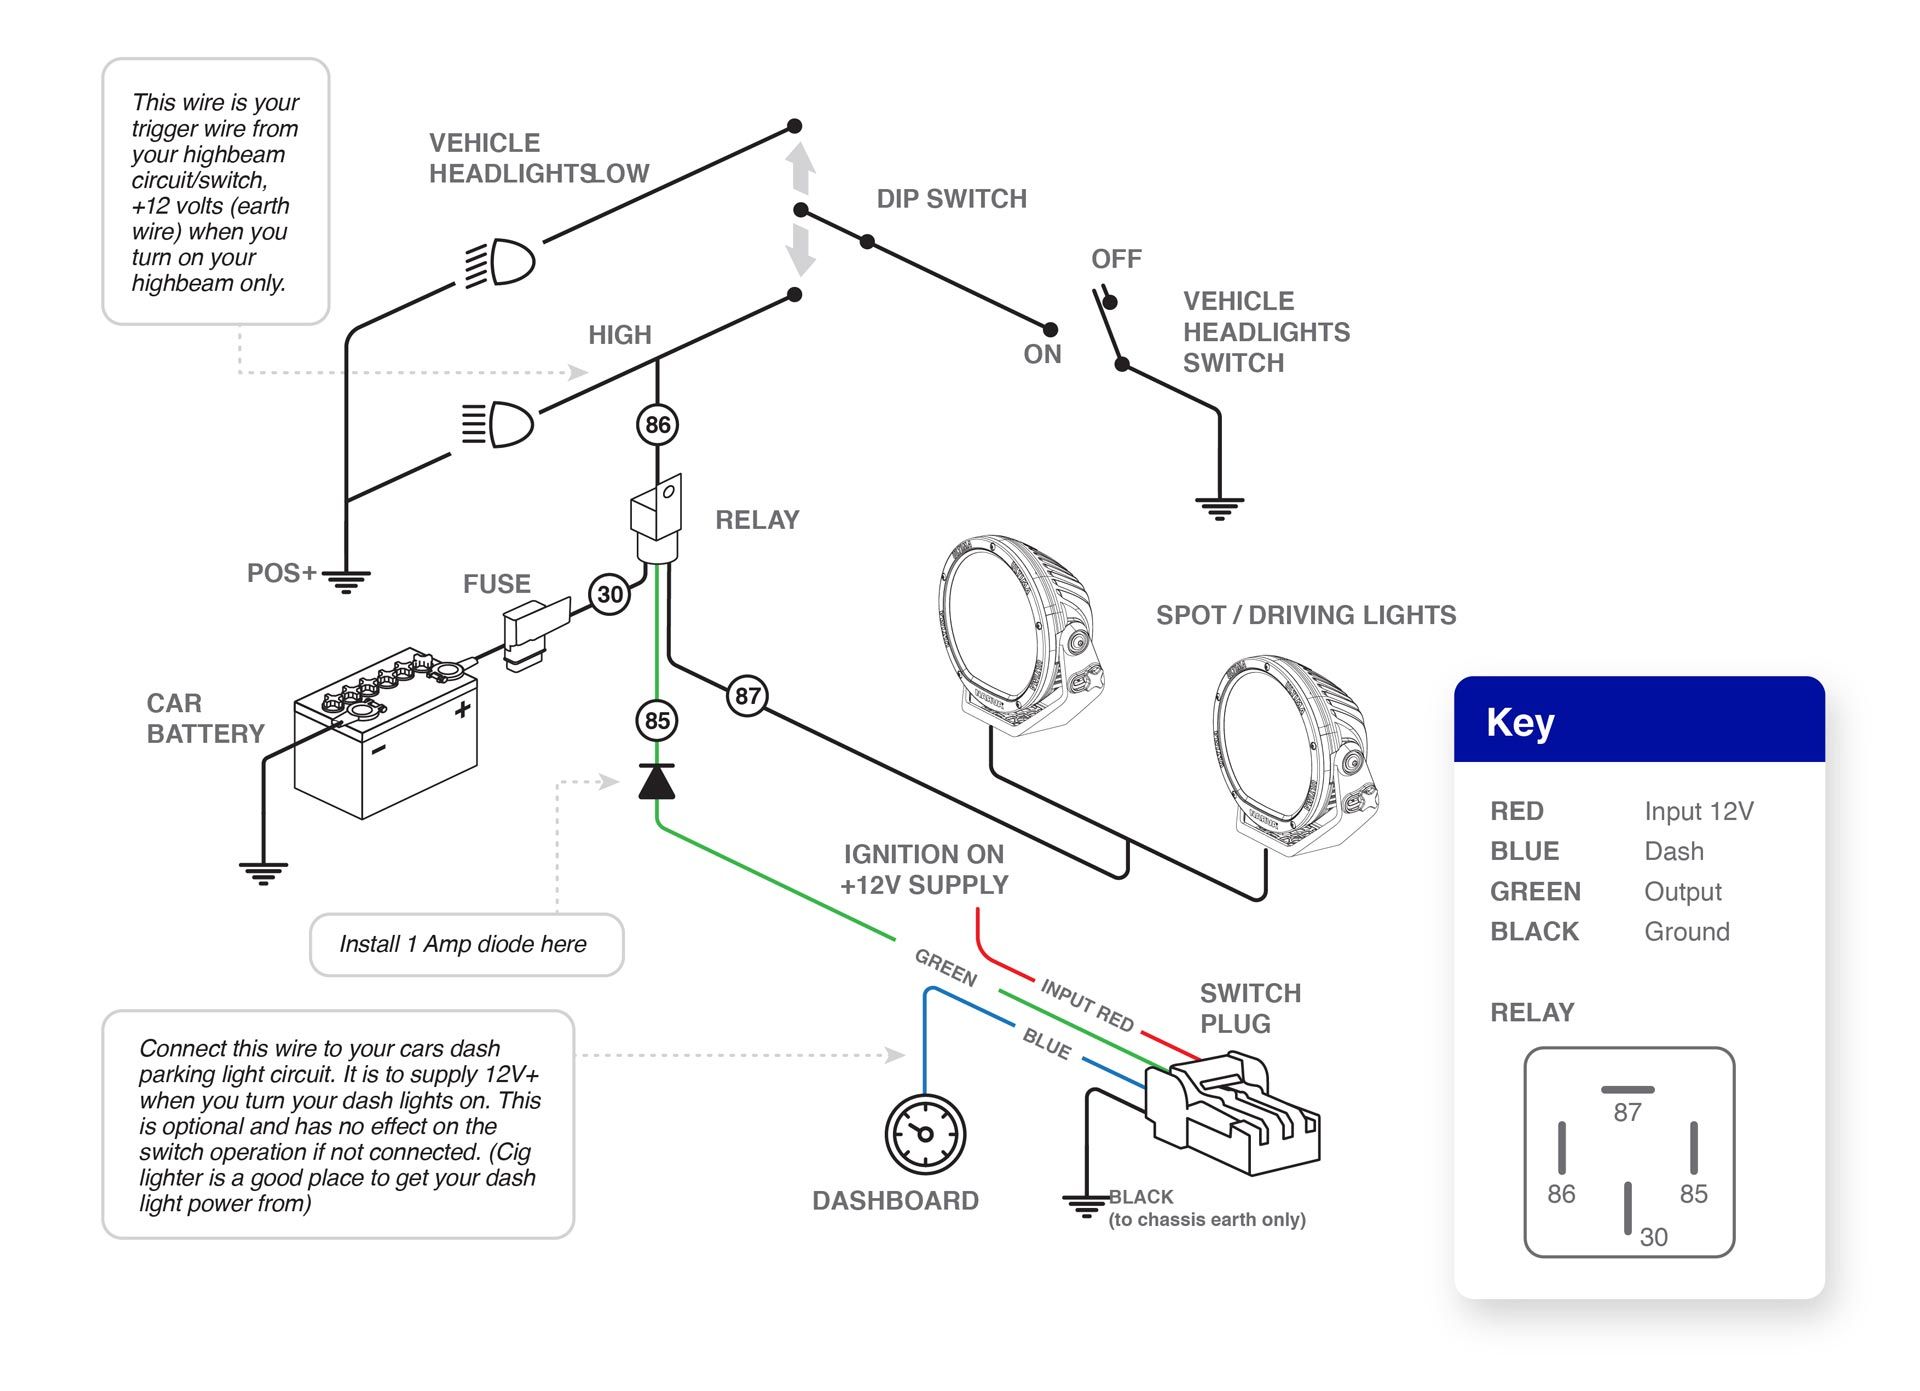 Switch wiring diagram for negative switched vehicles (refer to vehicle type)